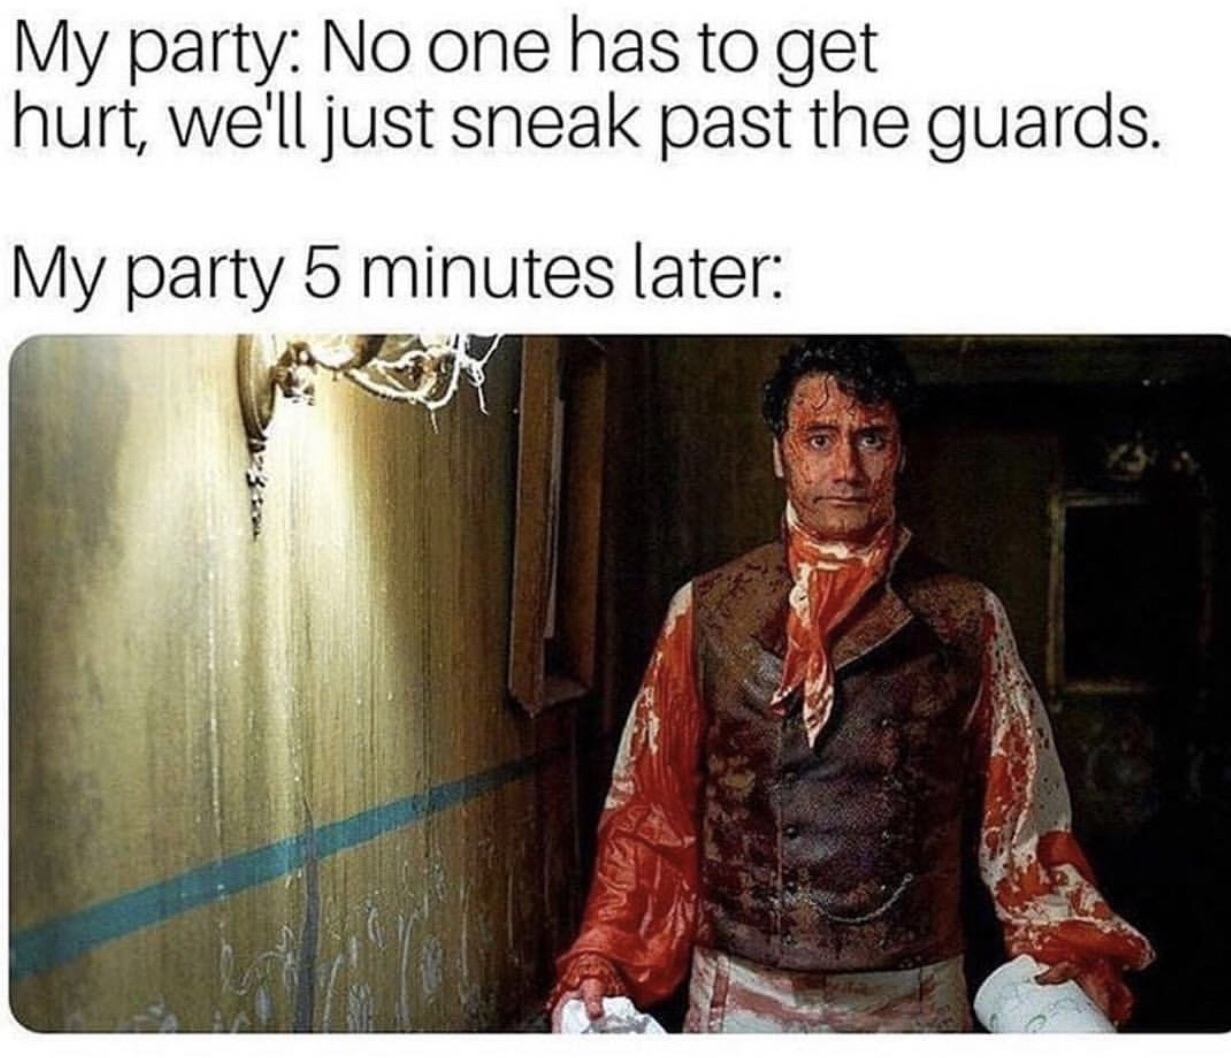 dungeons and dragons memes - My party No one has to get hurt, we'll just sneak past the guards. My party 5 minutes later